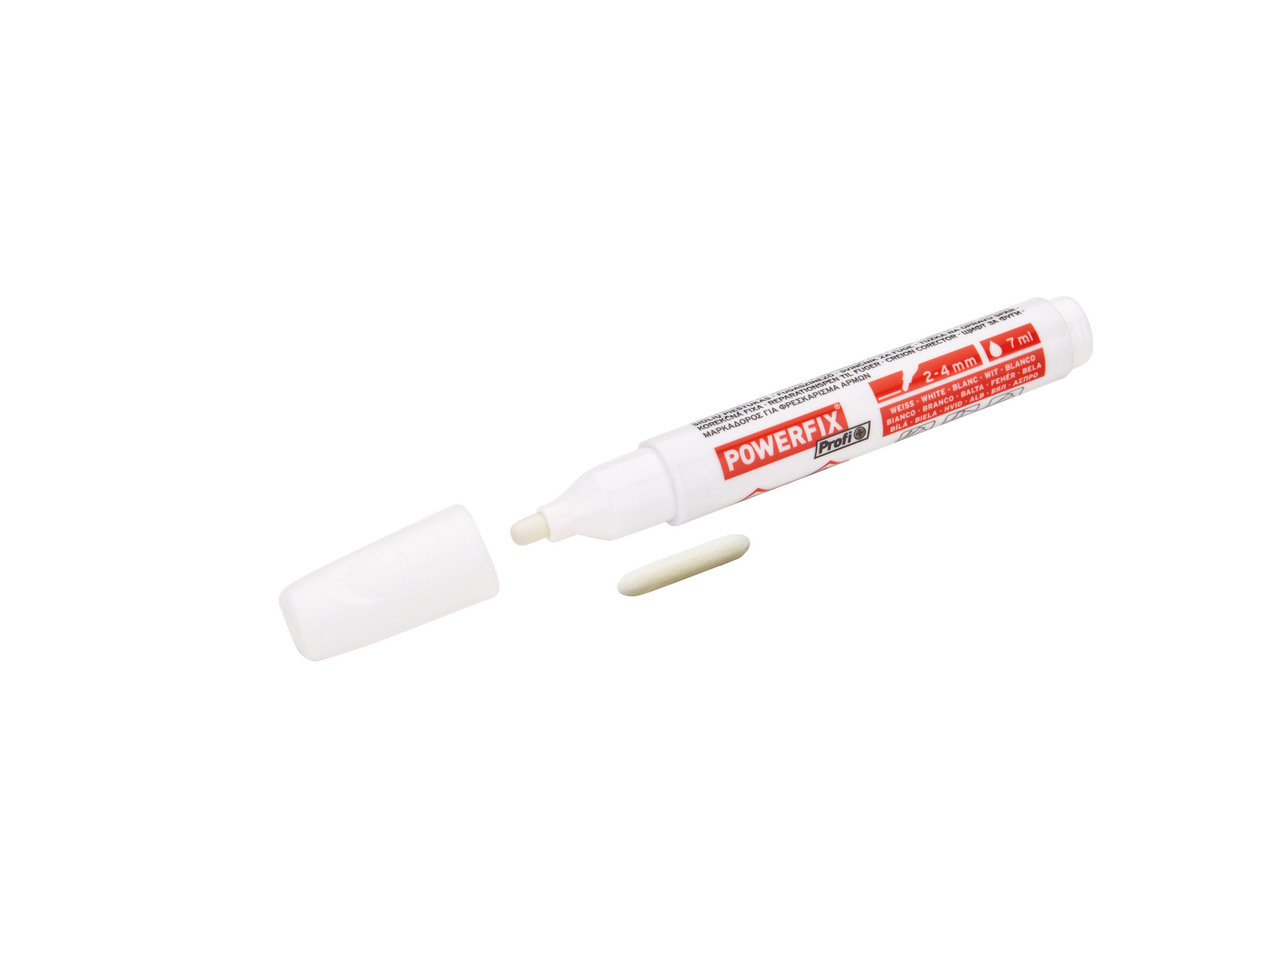 Grout Pen or Wood Touch-Up Pen